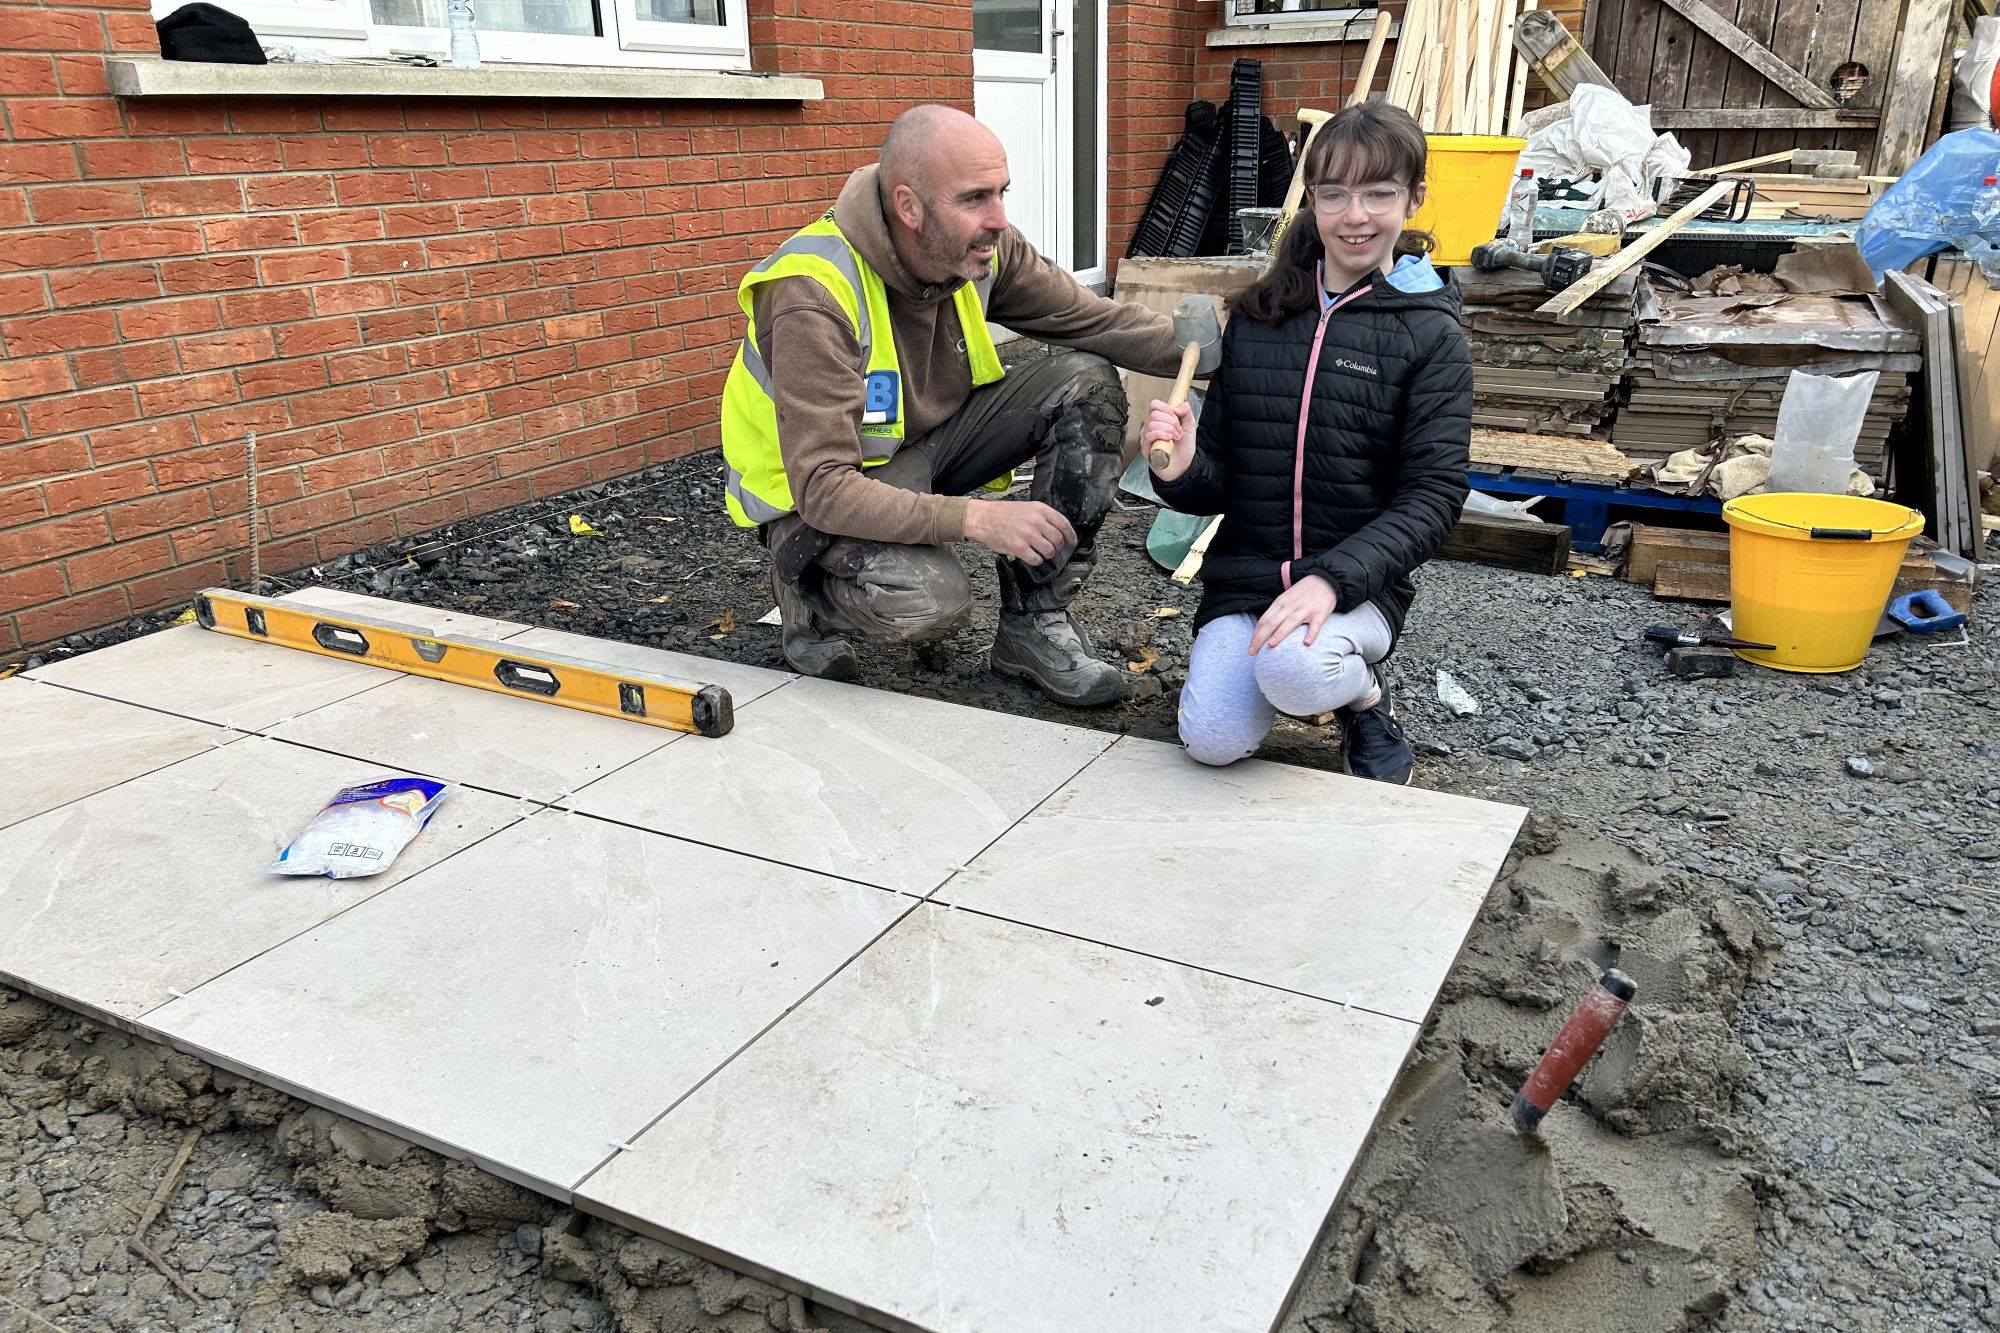 Band of Builders has once again enlisted the help of volunteer builders, landscapers and suppliers, this time to complete a project for 12-year old Aiva Barry at her home in Craigavon, Northern Ireland.